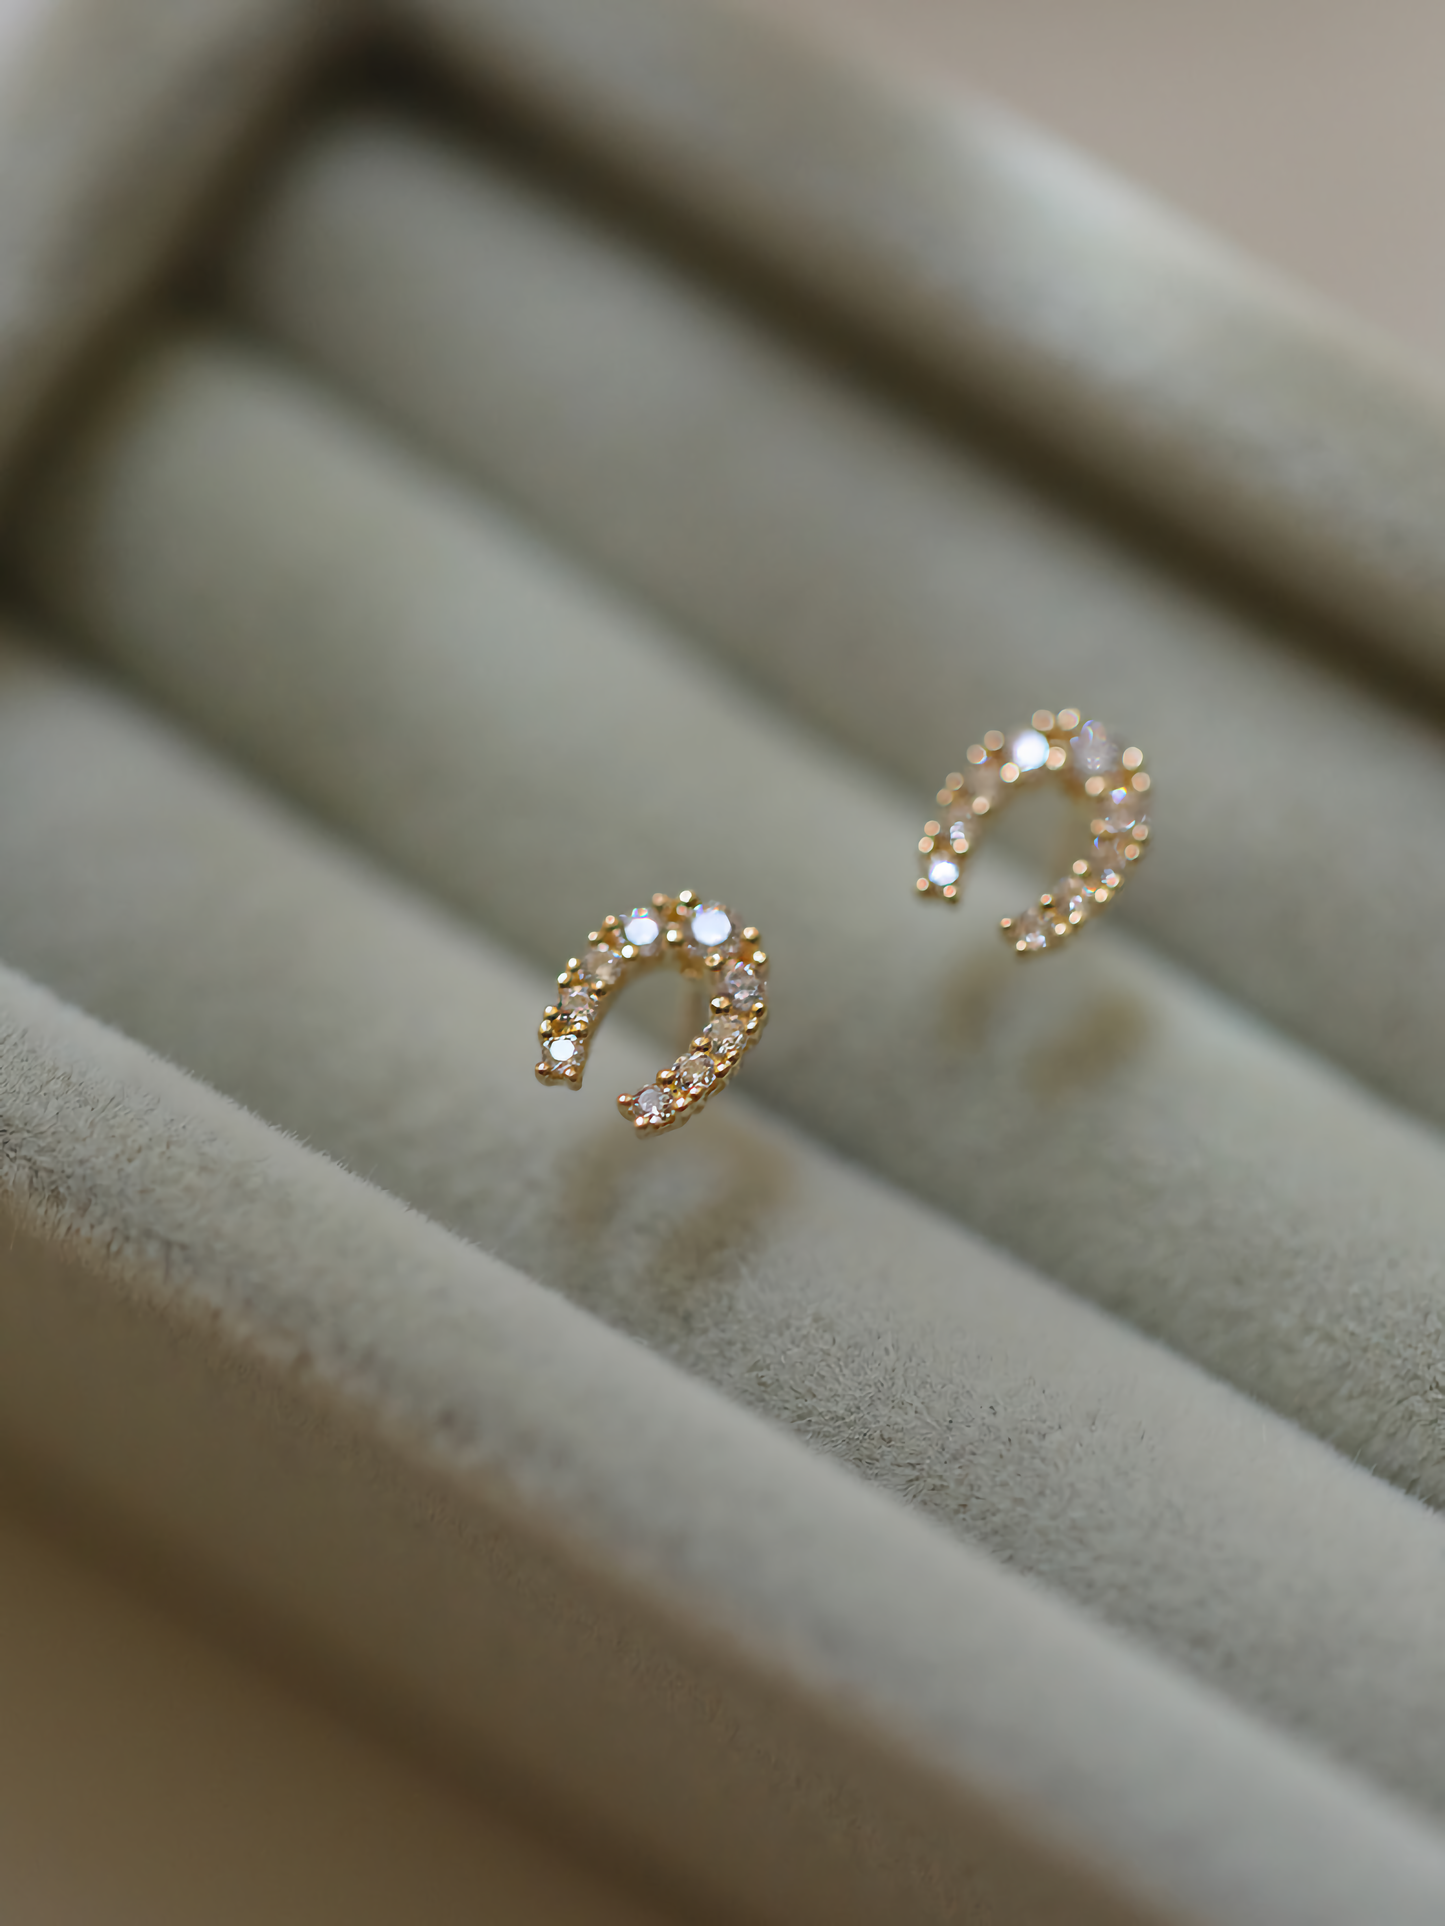 Close-up view of the 9ct solid gold horseshoe studs, reflecting the light to emphasize their lucky charm and elegance.